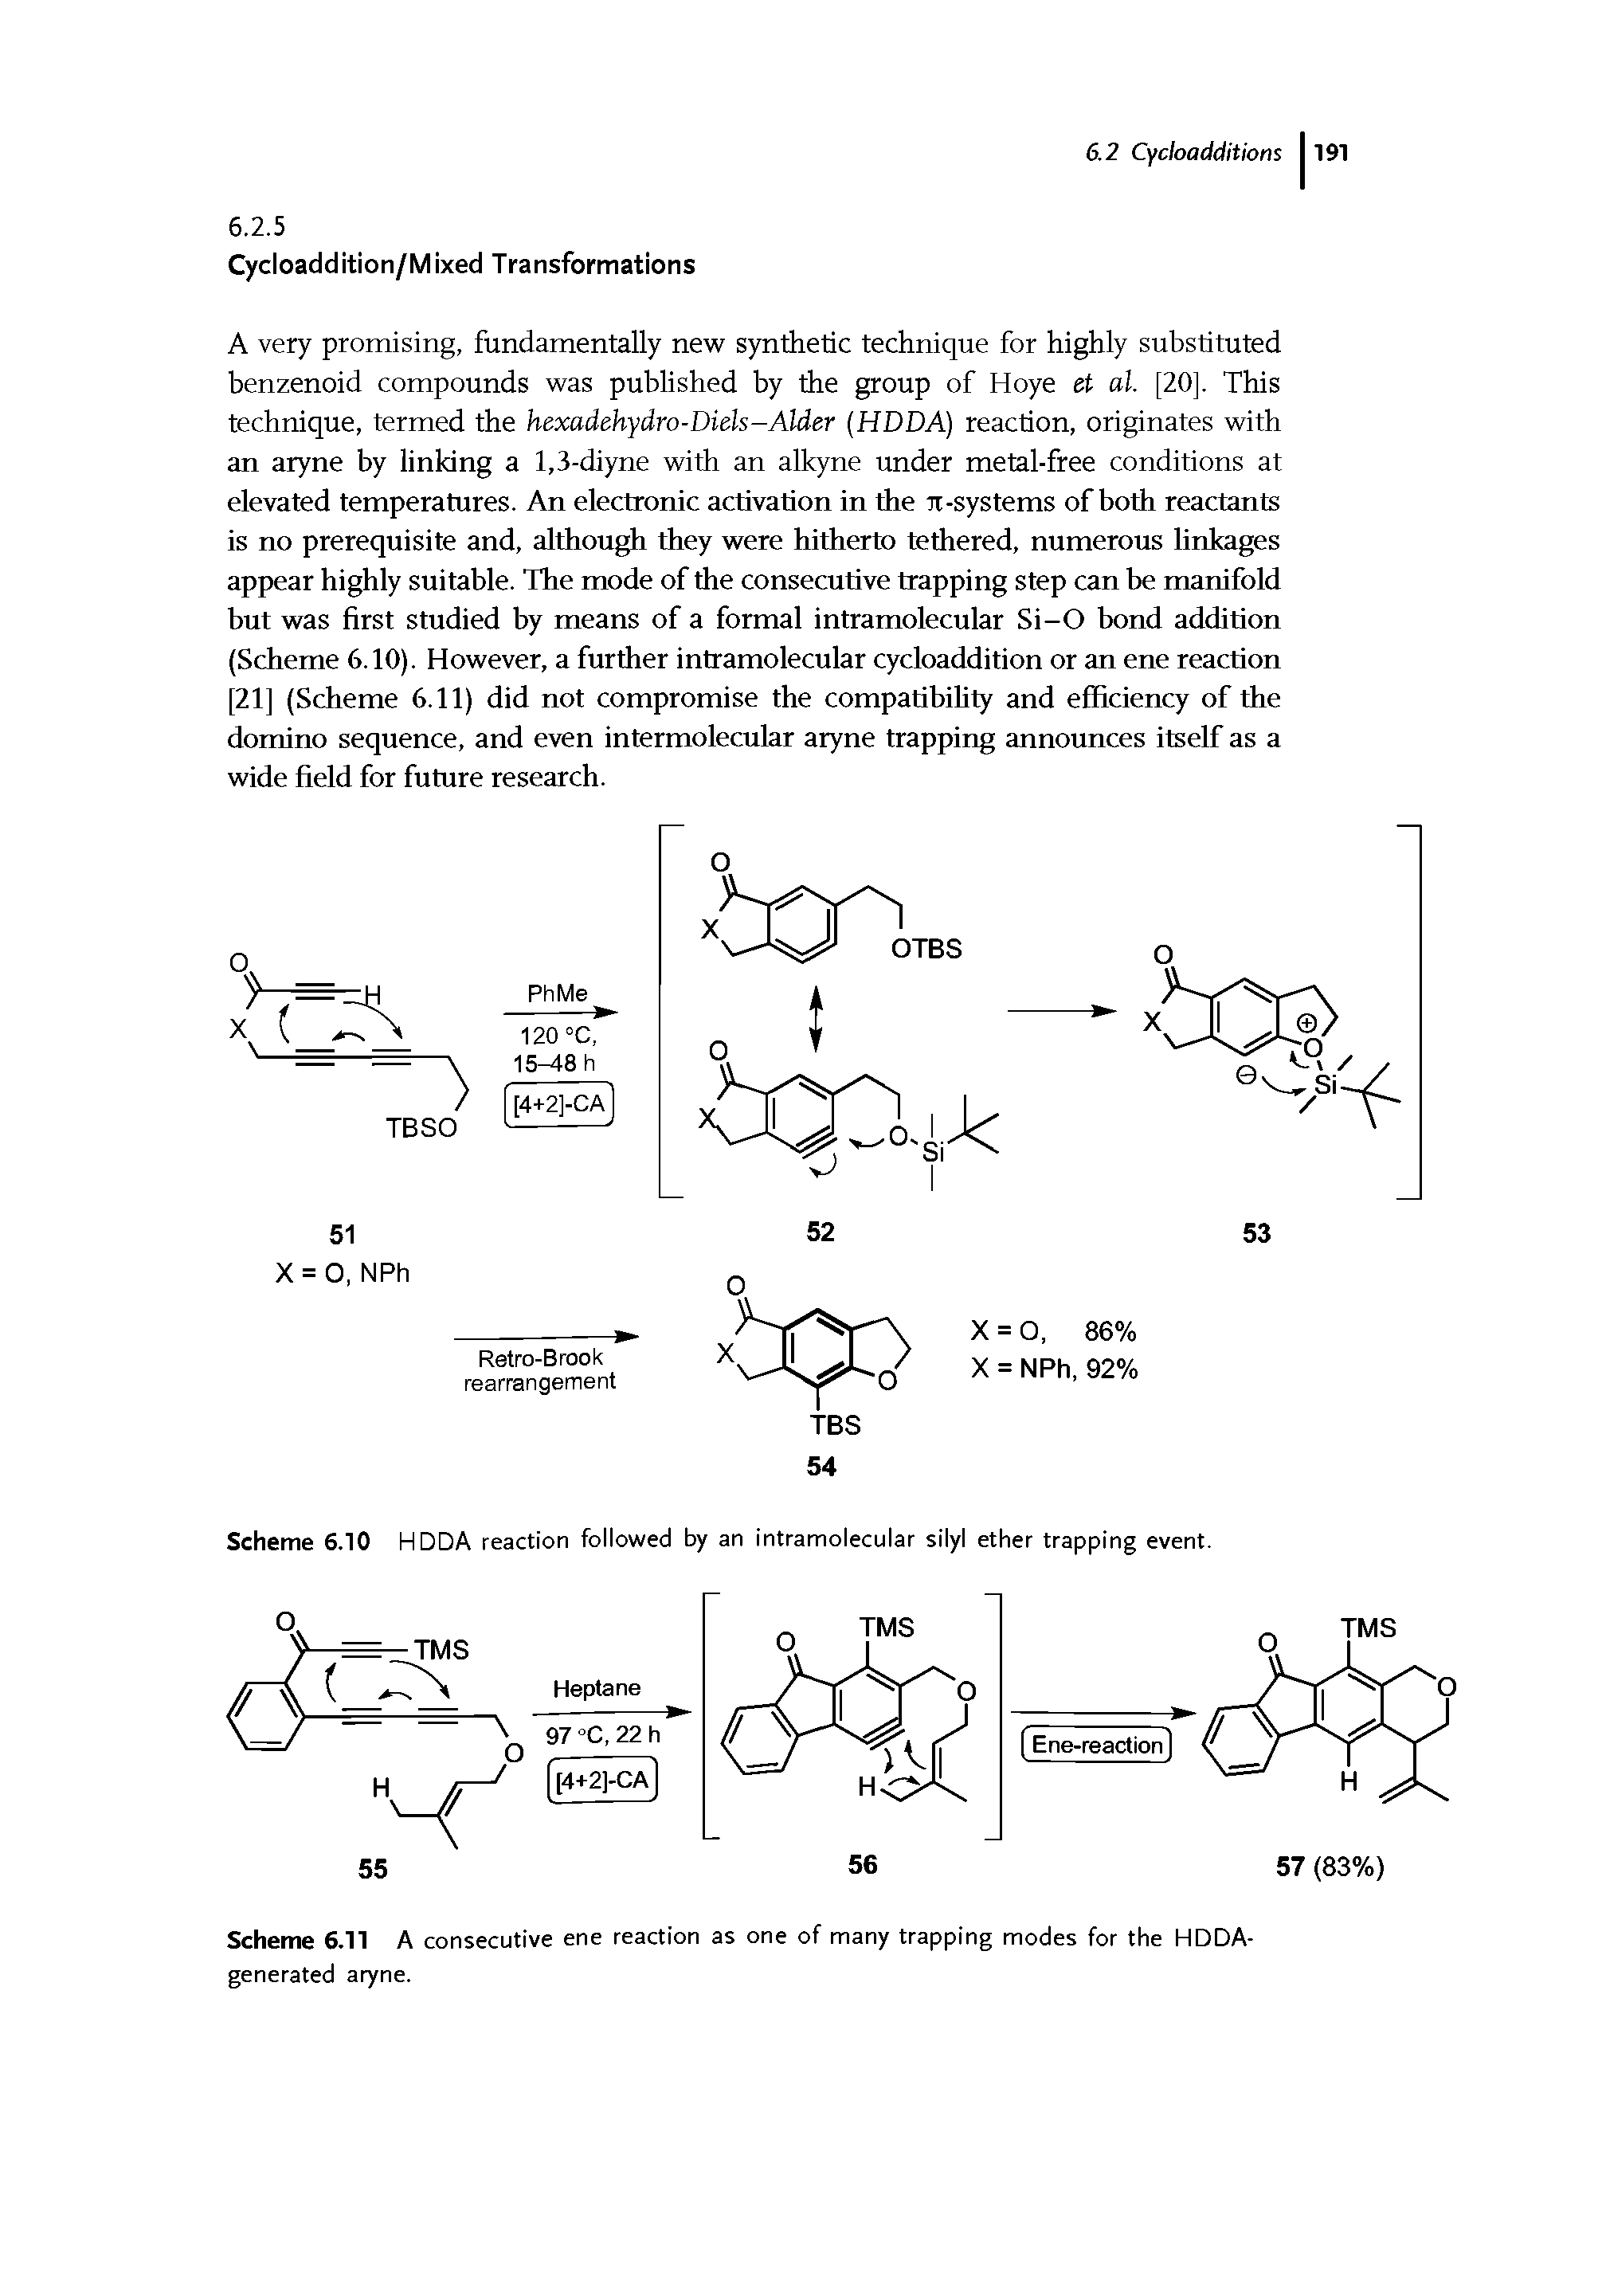 Scheme 6.11 A consecutive ene reaction as one of many trapping modes for the HDDA-generated aryne.